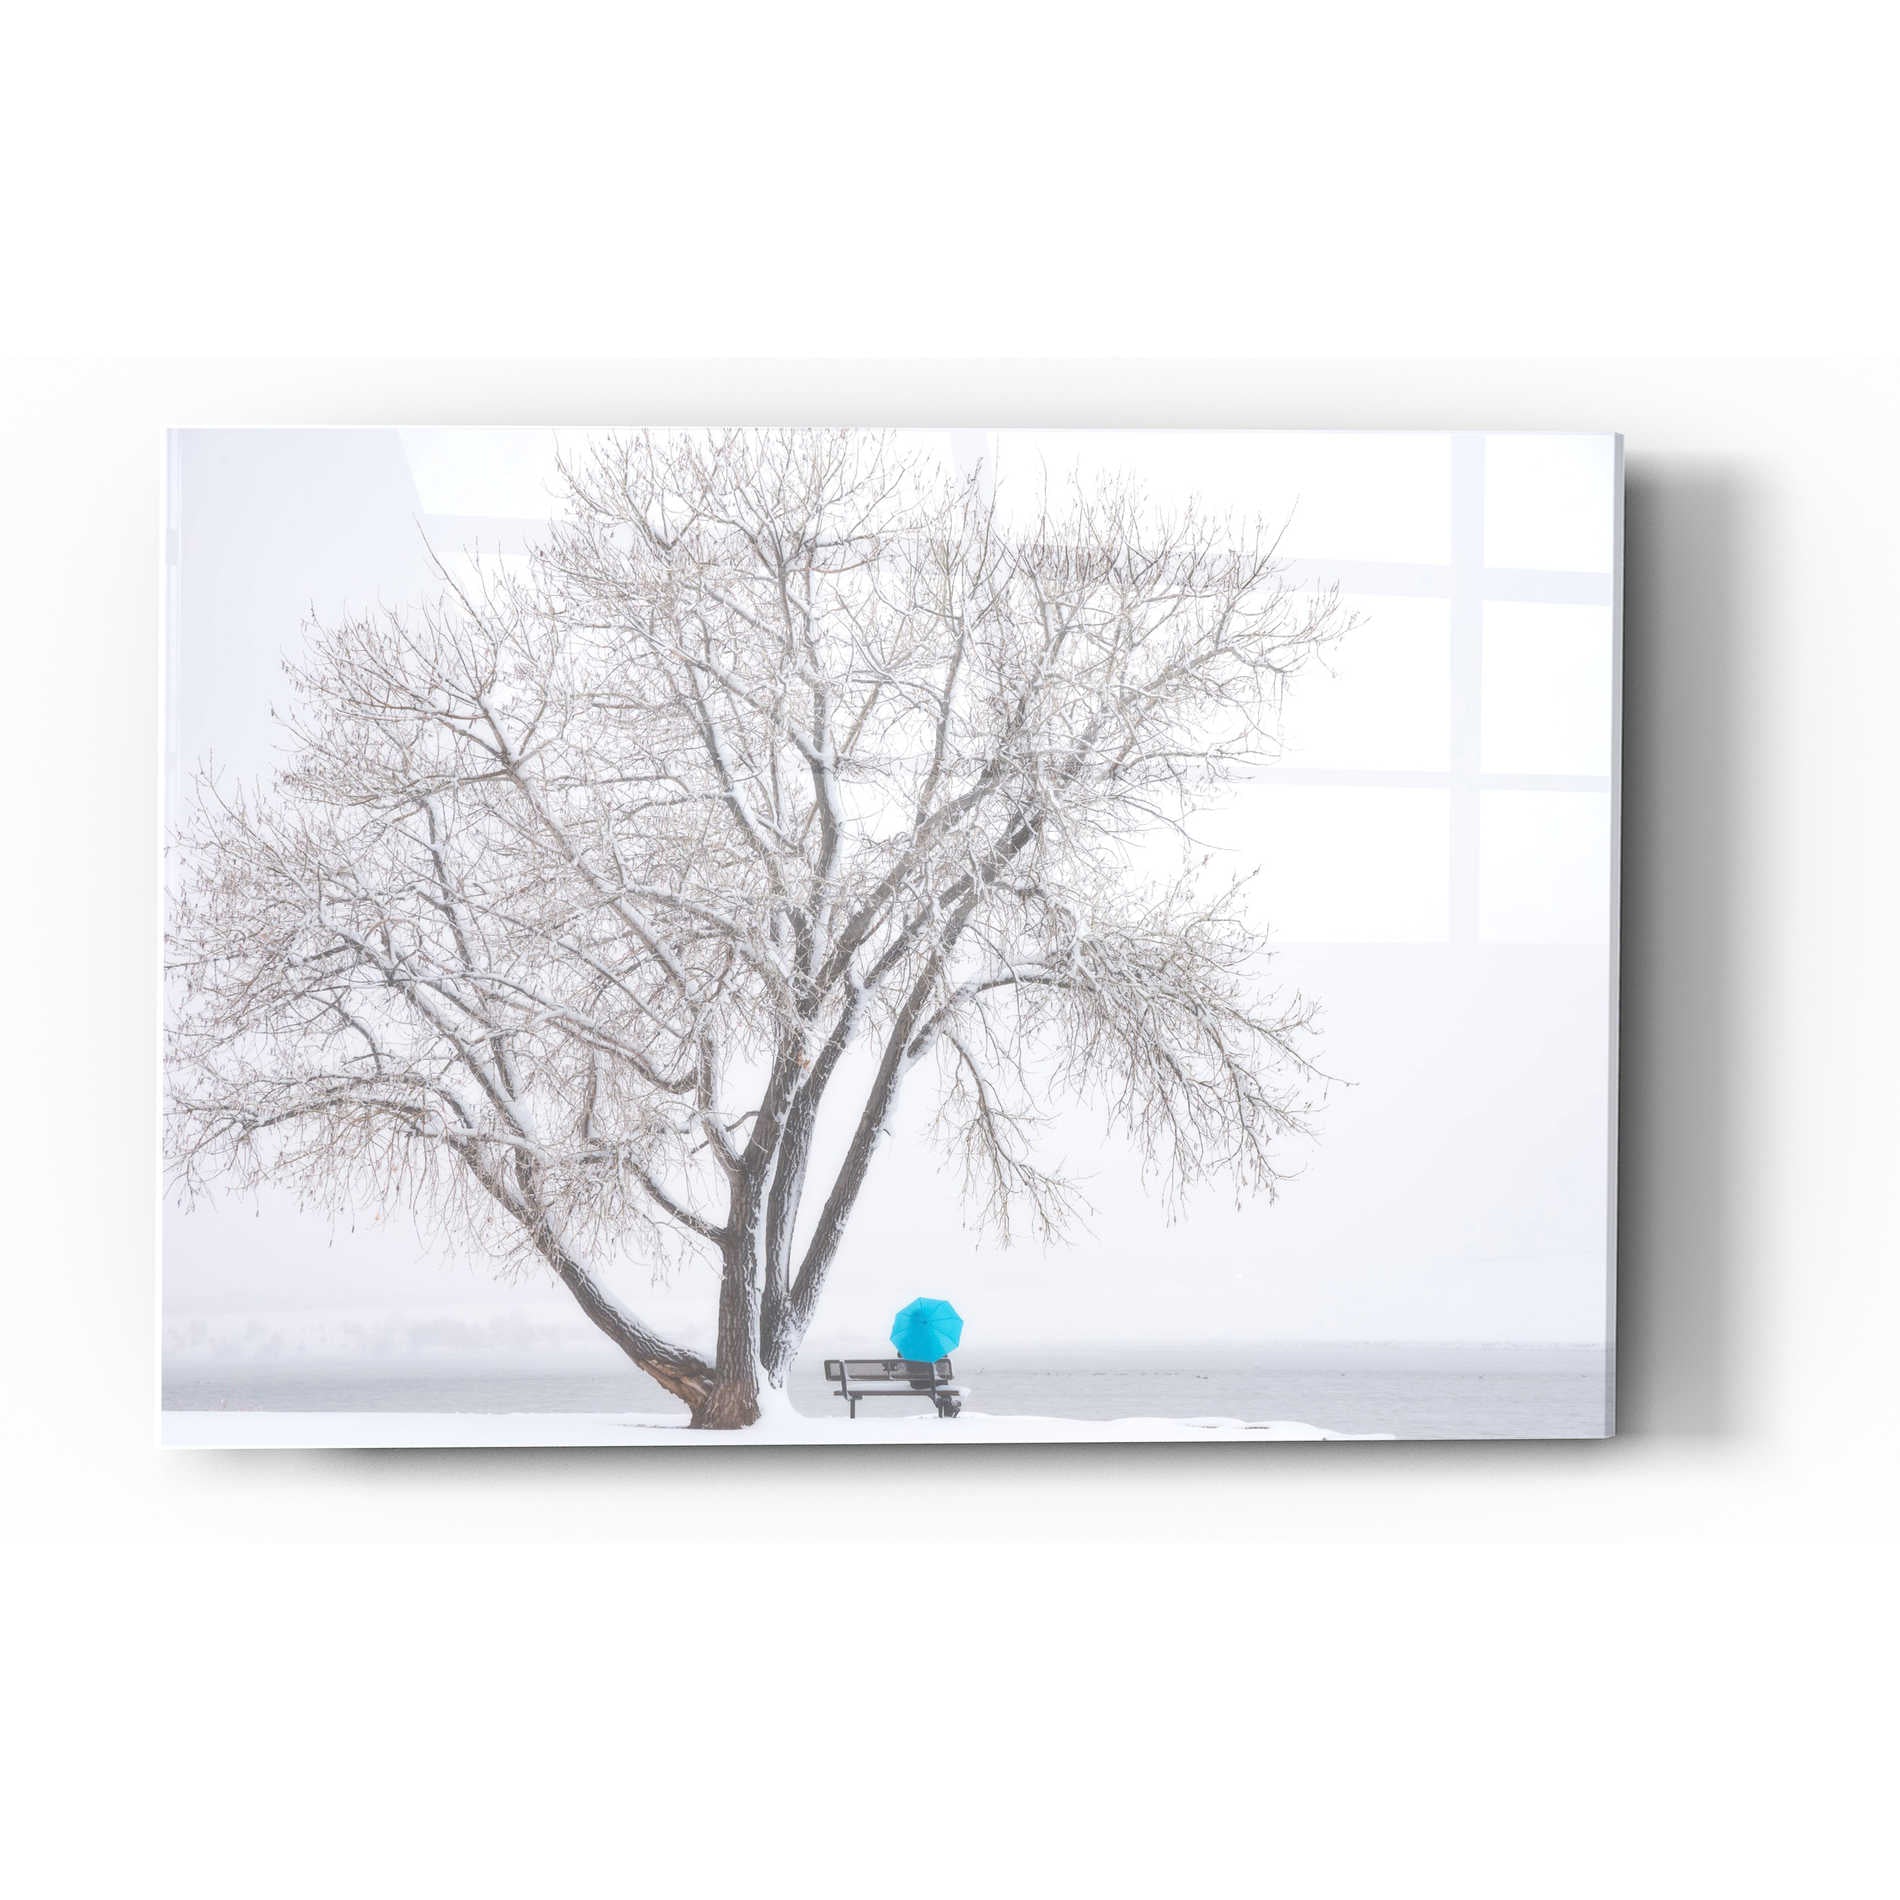 Epic Art "Another Winter Alone" by Darren White, Acrylic Glass Wall Art,16x24